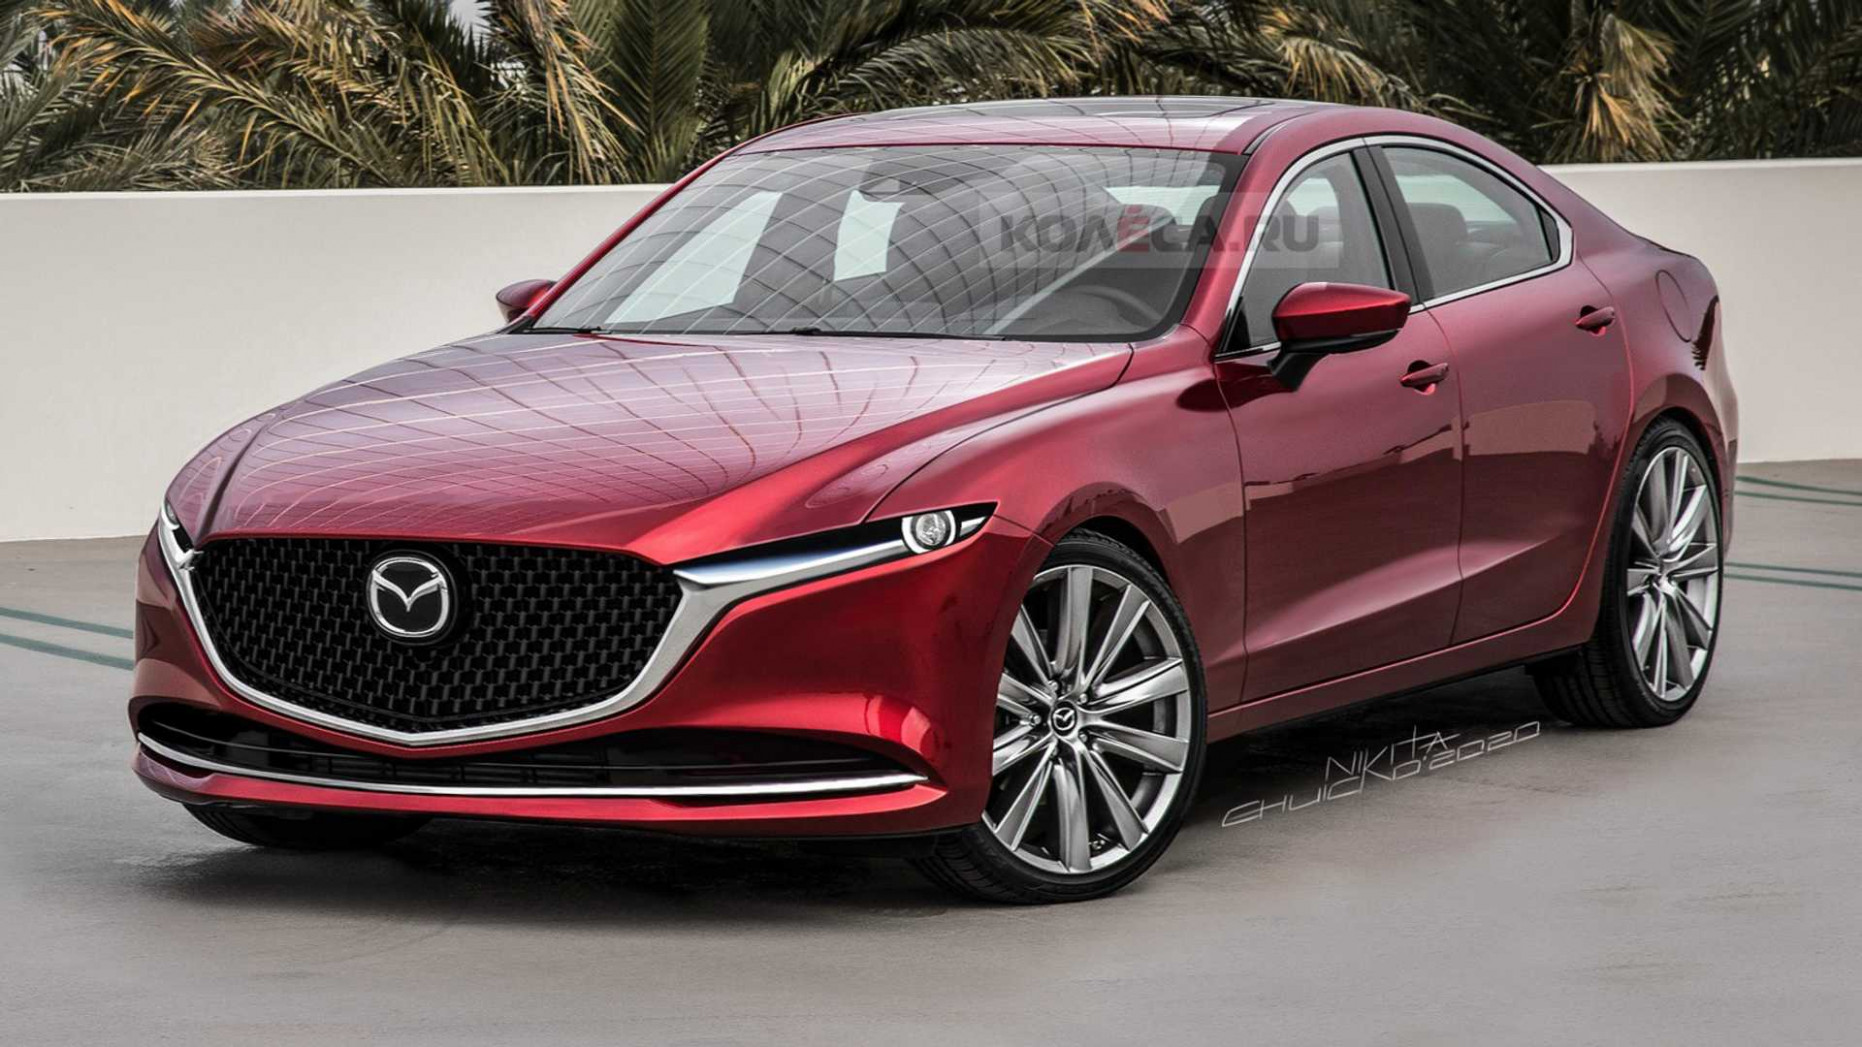 Release Date When Is The 2023 Mazda 6 Coming Out